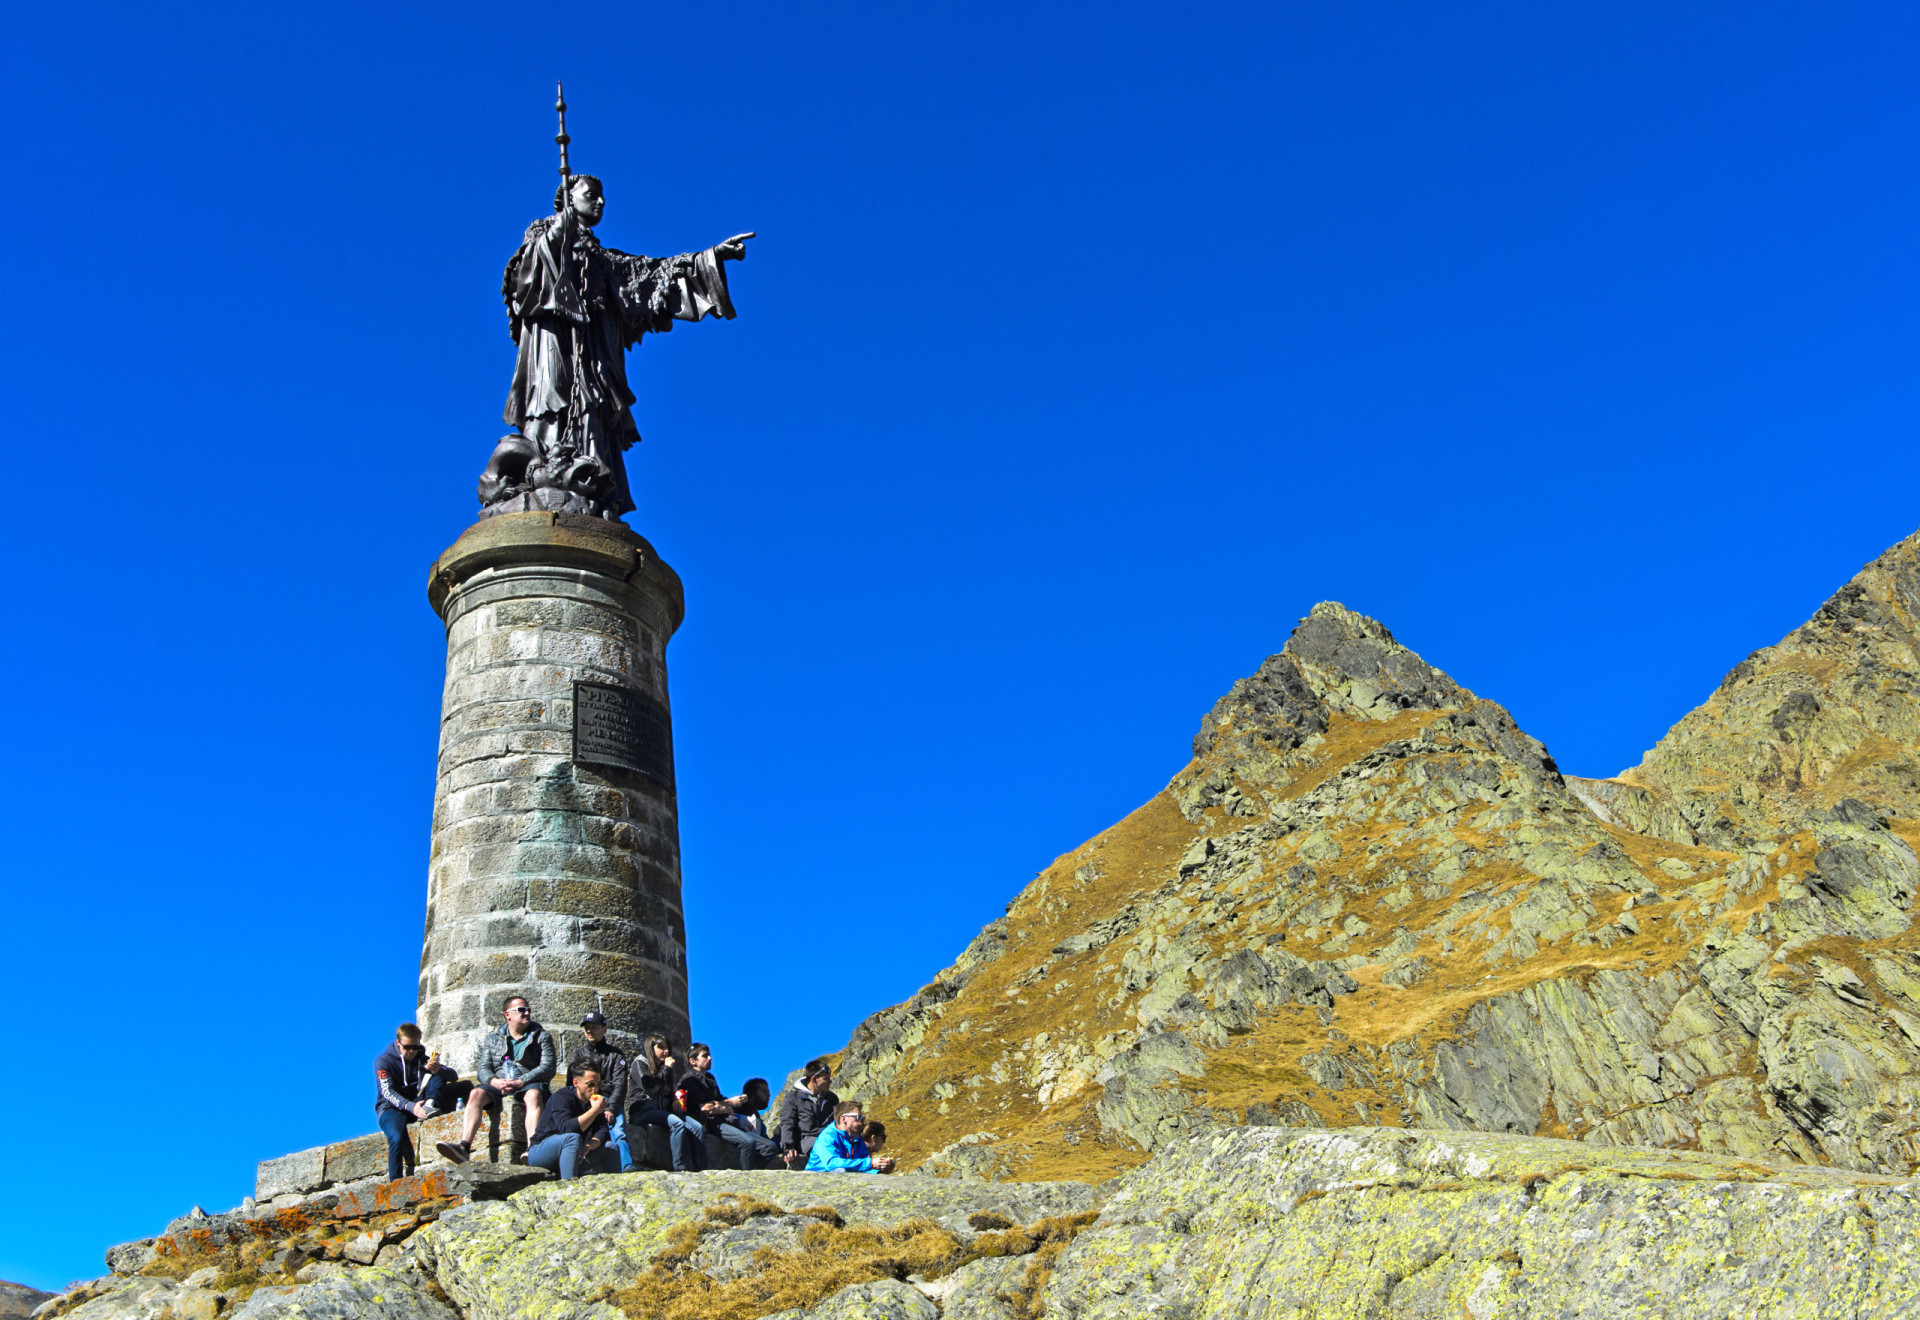 <p>Only open for four months out of the year, from July through October, the Great St. Bernard Pass connects Martigny to the Aosta Valley in Italy. The famous hospice in the area was run by Augustinian monks in the Middle Ages, and today symbolizes their generosity towards travelers.</p><p><a href="https://www.msn.com/en-us/community/channel/vid-7xx8mnucu55yw63we9va2gwr7uihbxwc68fxqp25x6tg4ftibpra?cvid=94631541bc0f4f89bfd59158d696ad7e">Follow us and access great exclusive content every day</a></p>